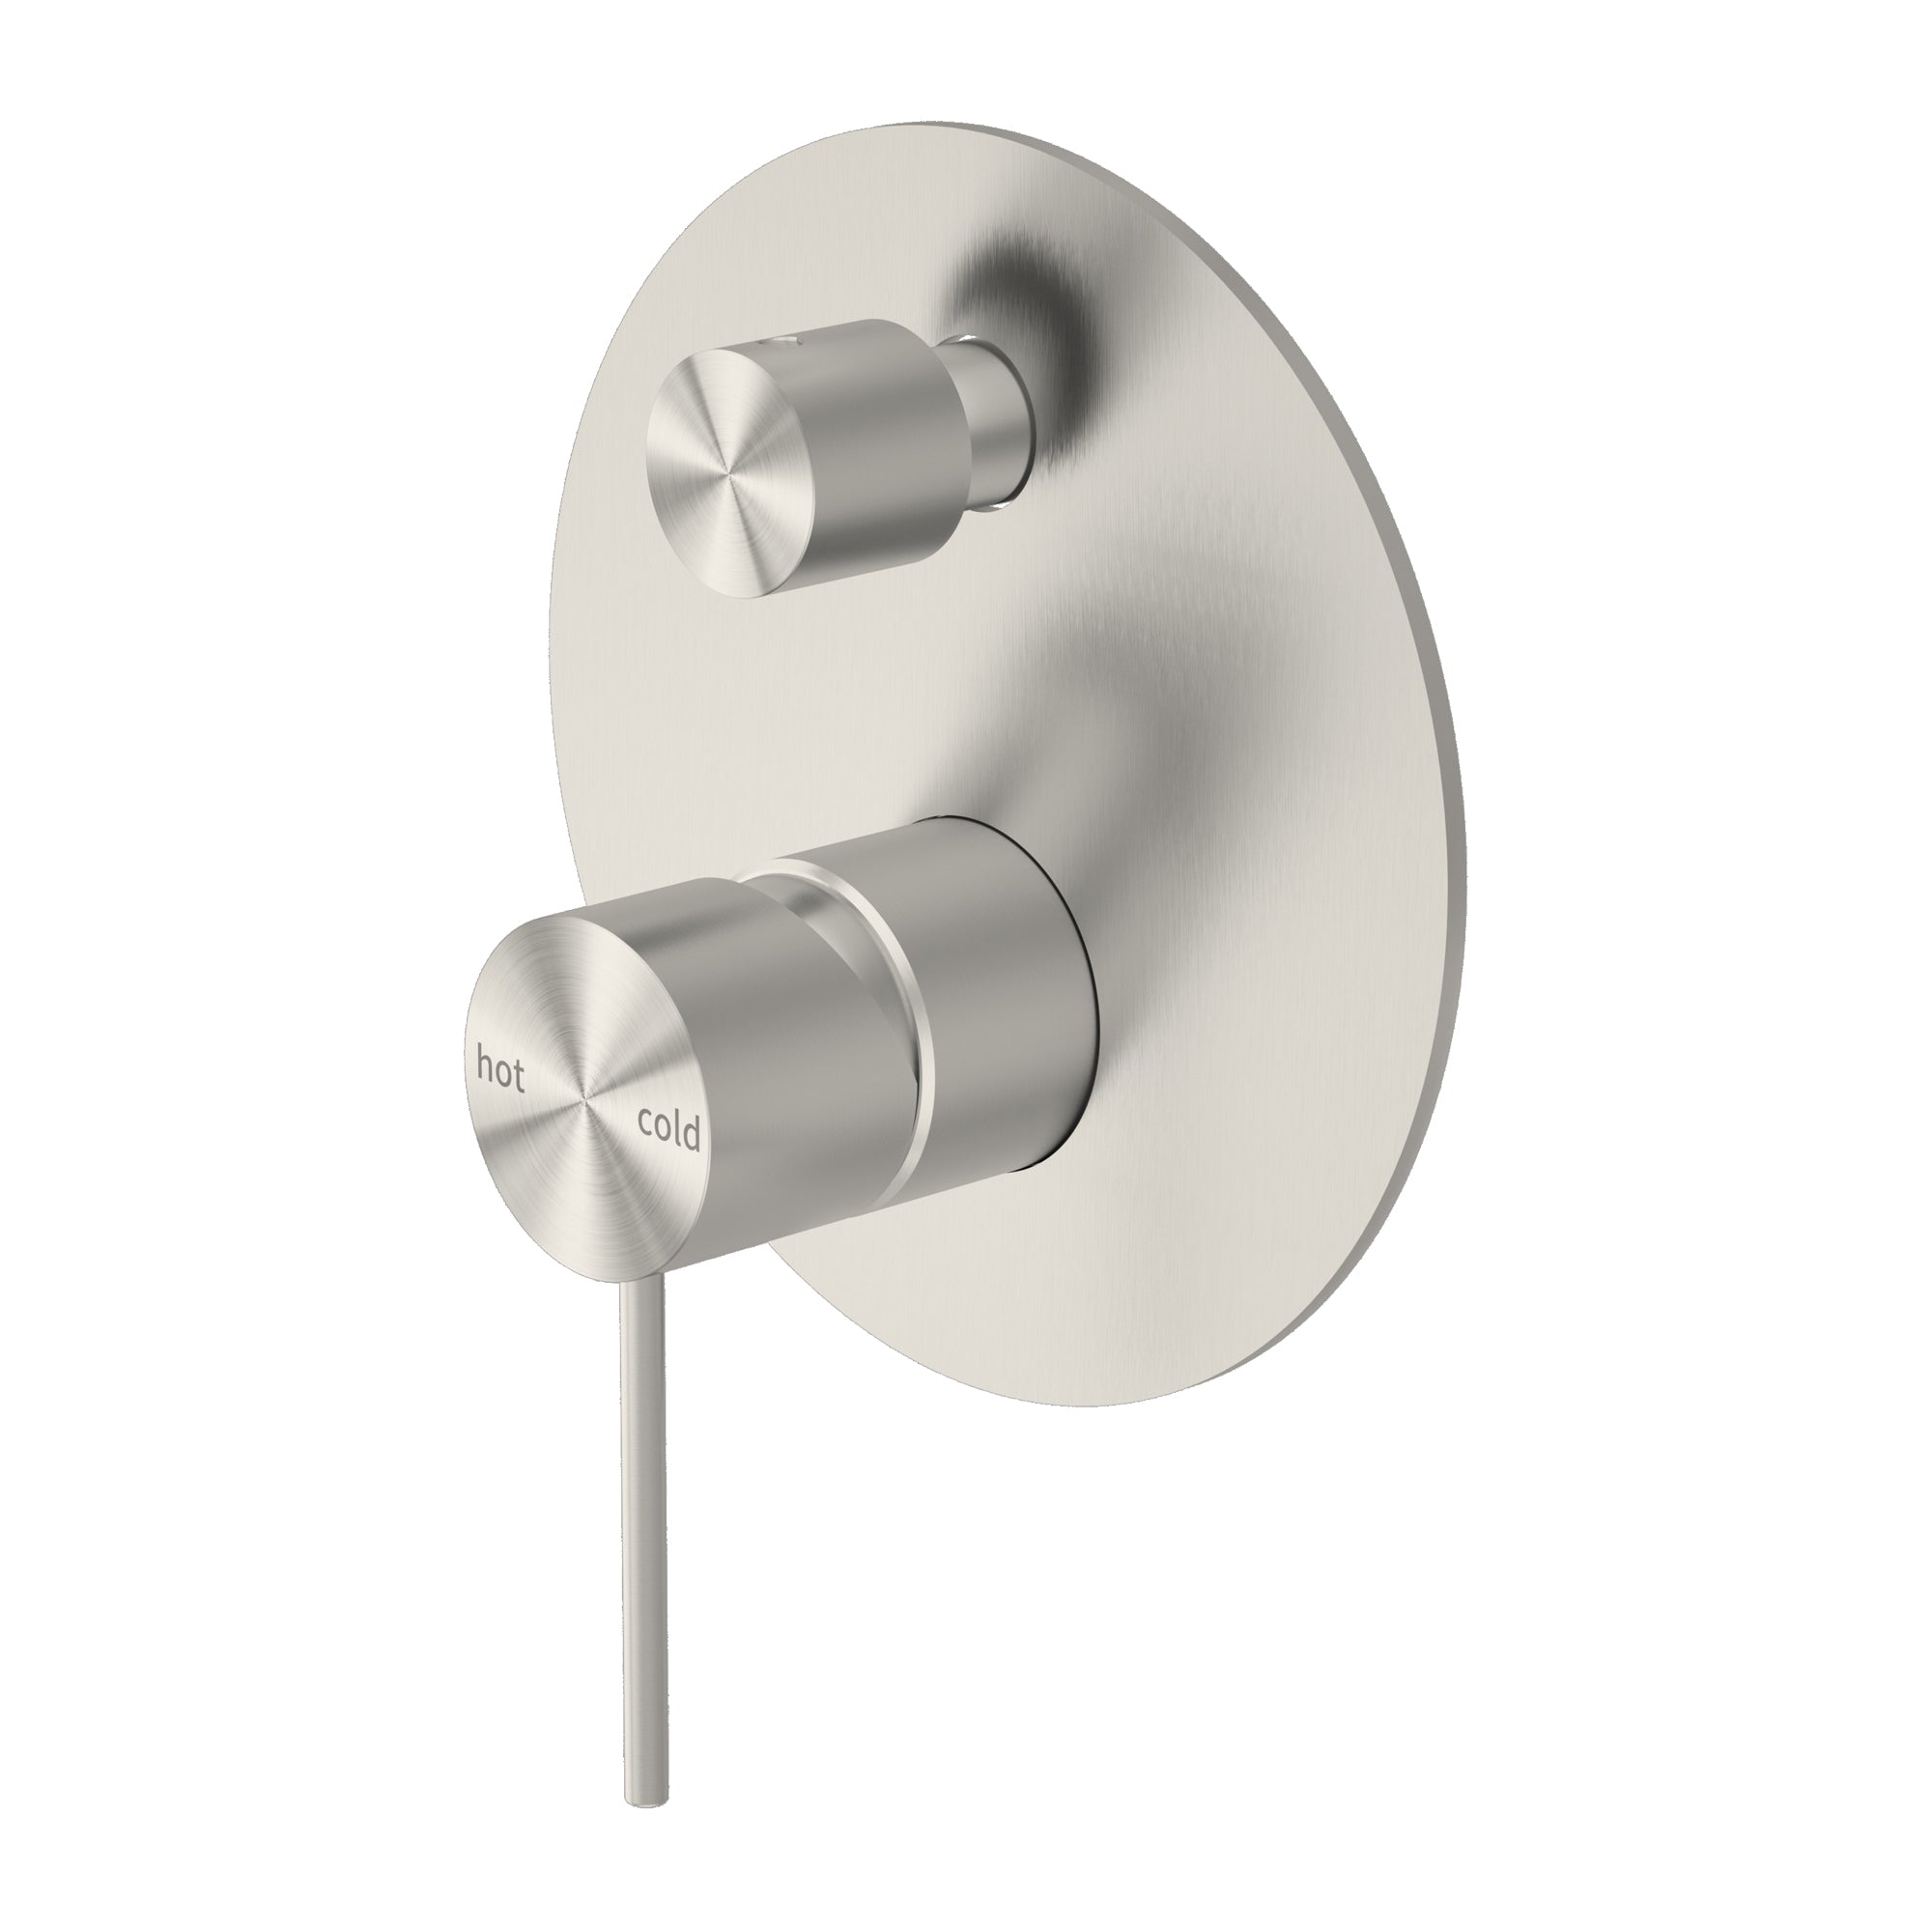 Mecca Shower Mixer With Divertor Brushed Nickel - NR221911ABN